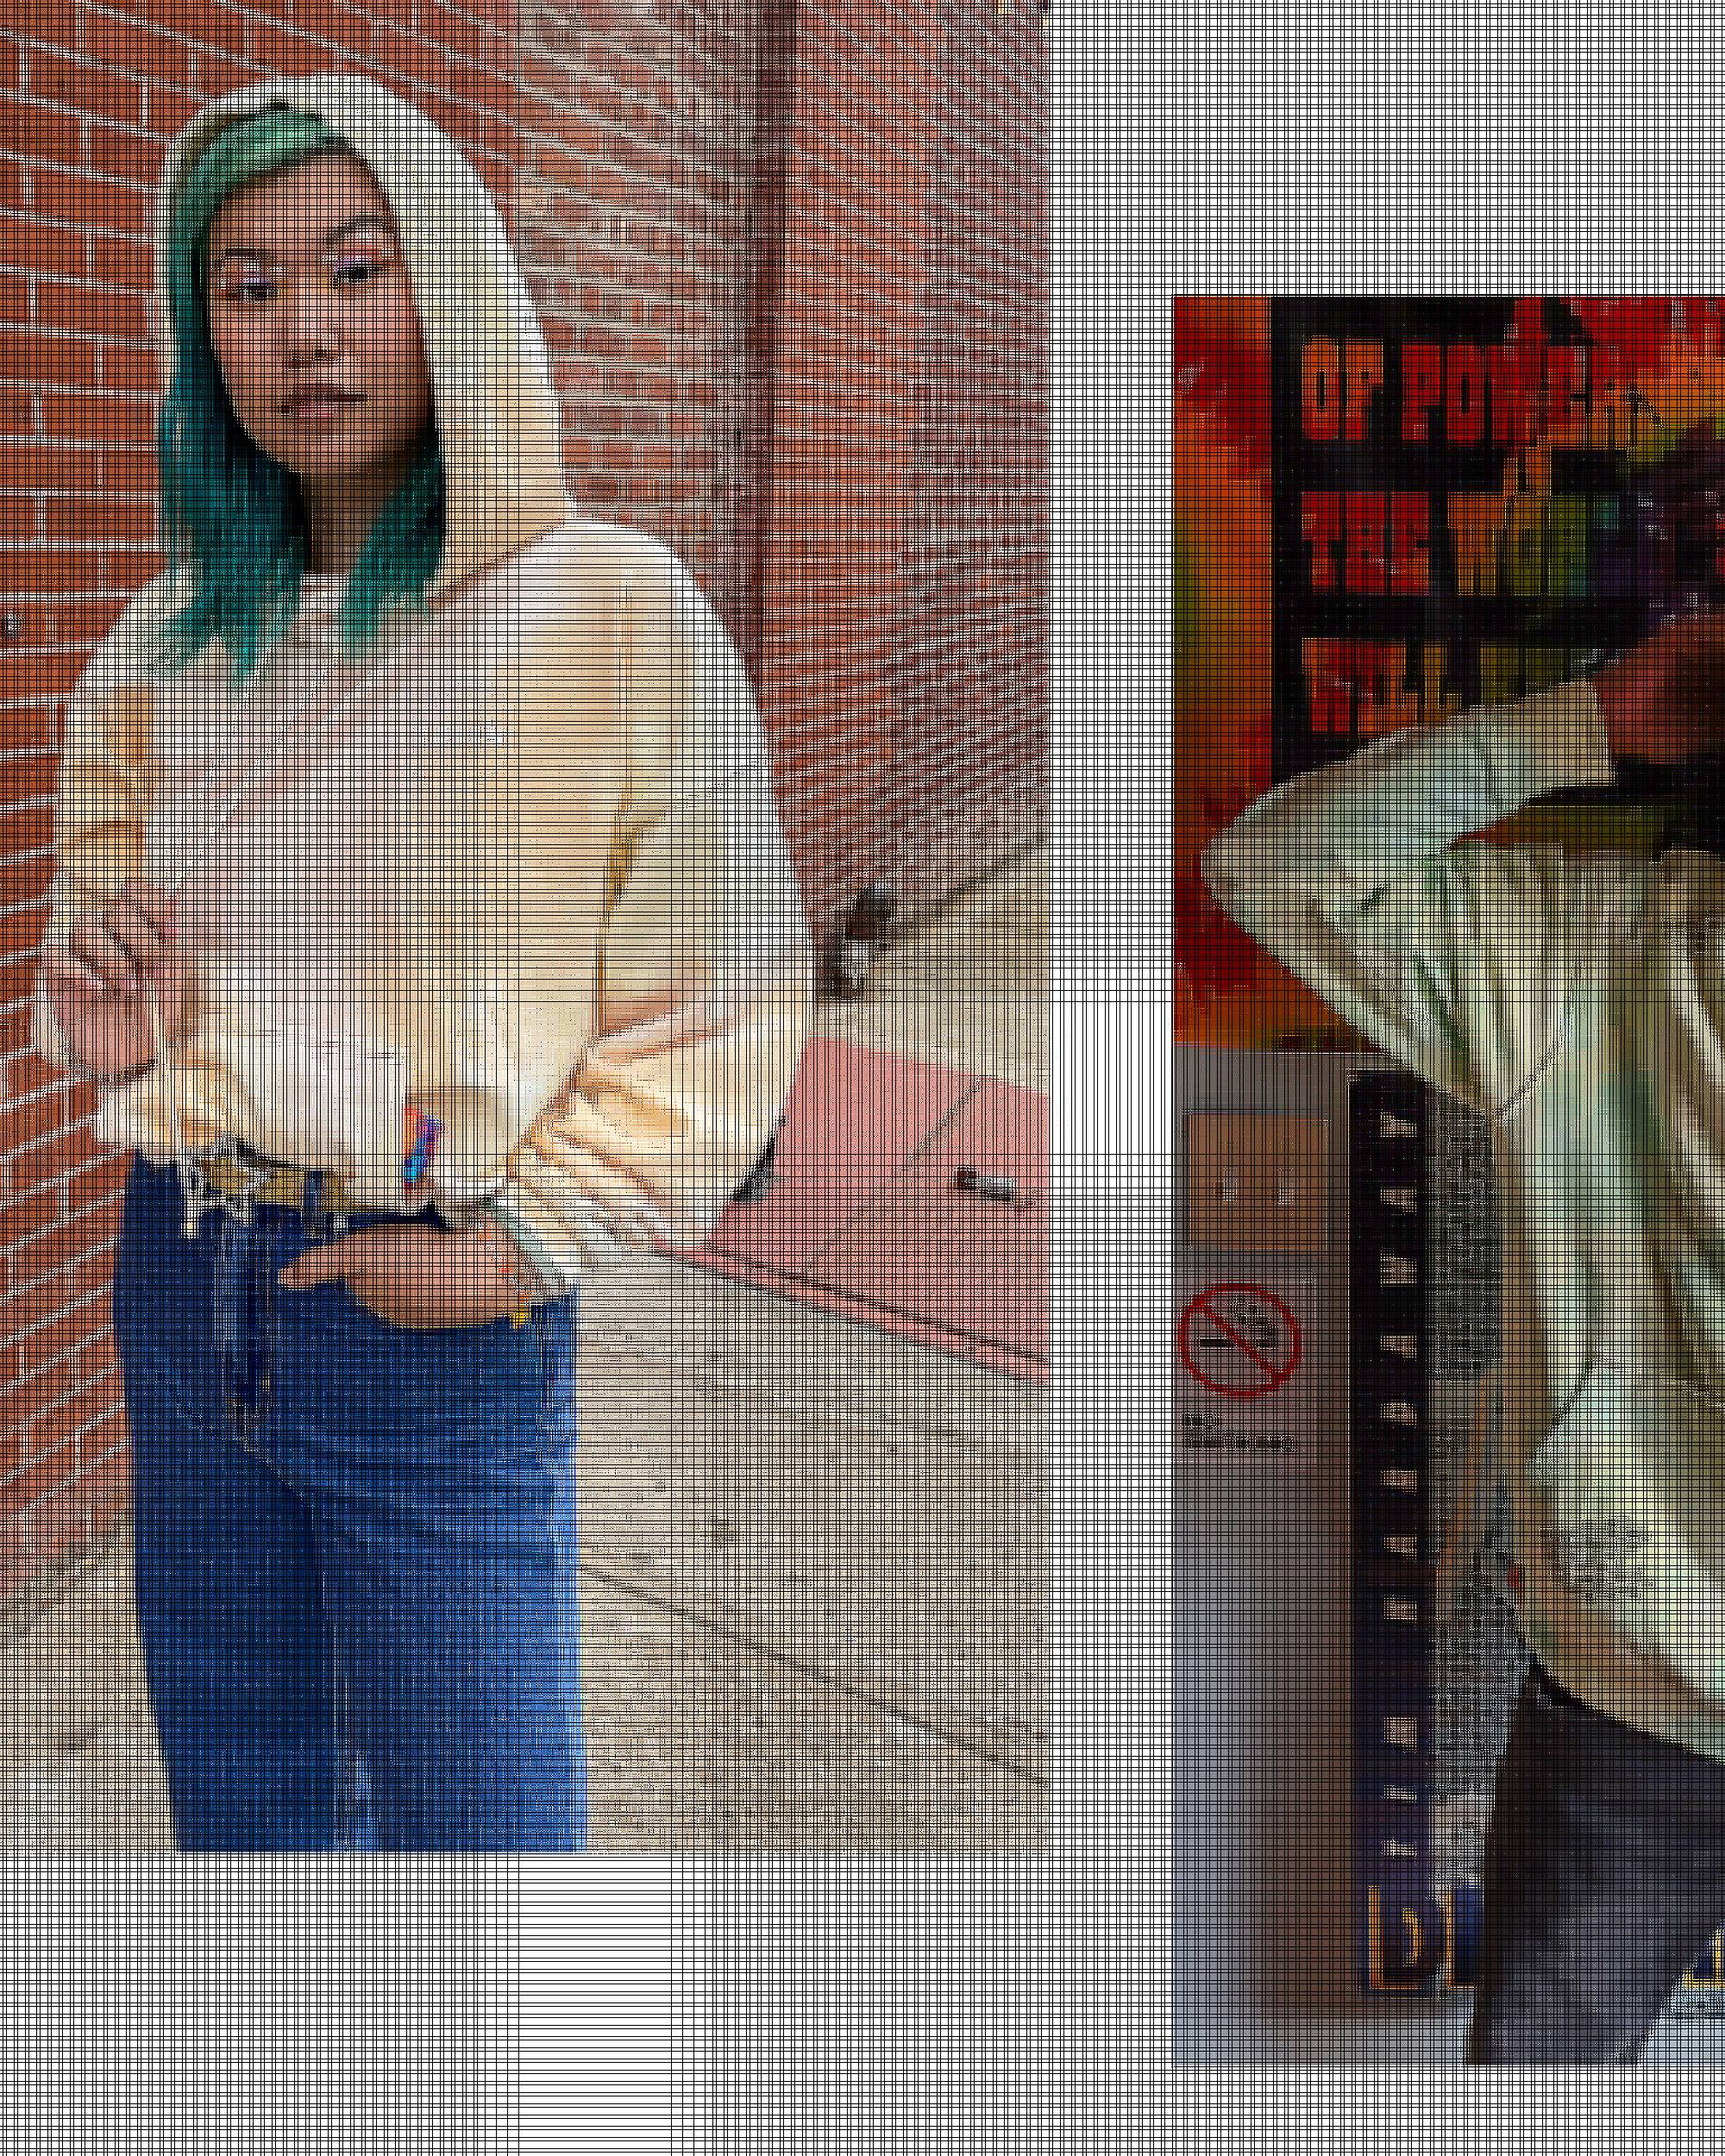 Two photos, the left photo is Mi-Anne wearing a light sweatshirt and Levi's jeans and the right shows Skip Jones wearing a a light tye dye sweatshirt and dark jeans